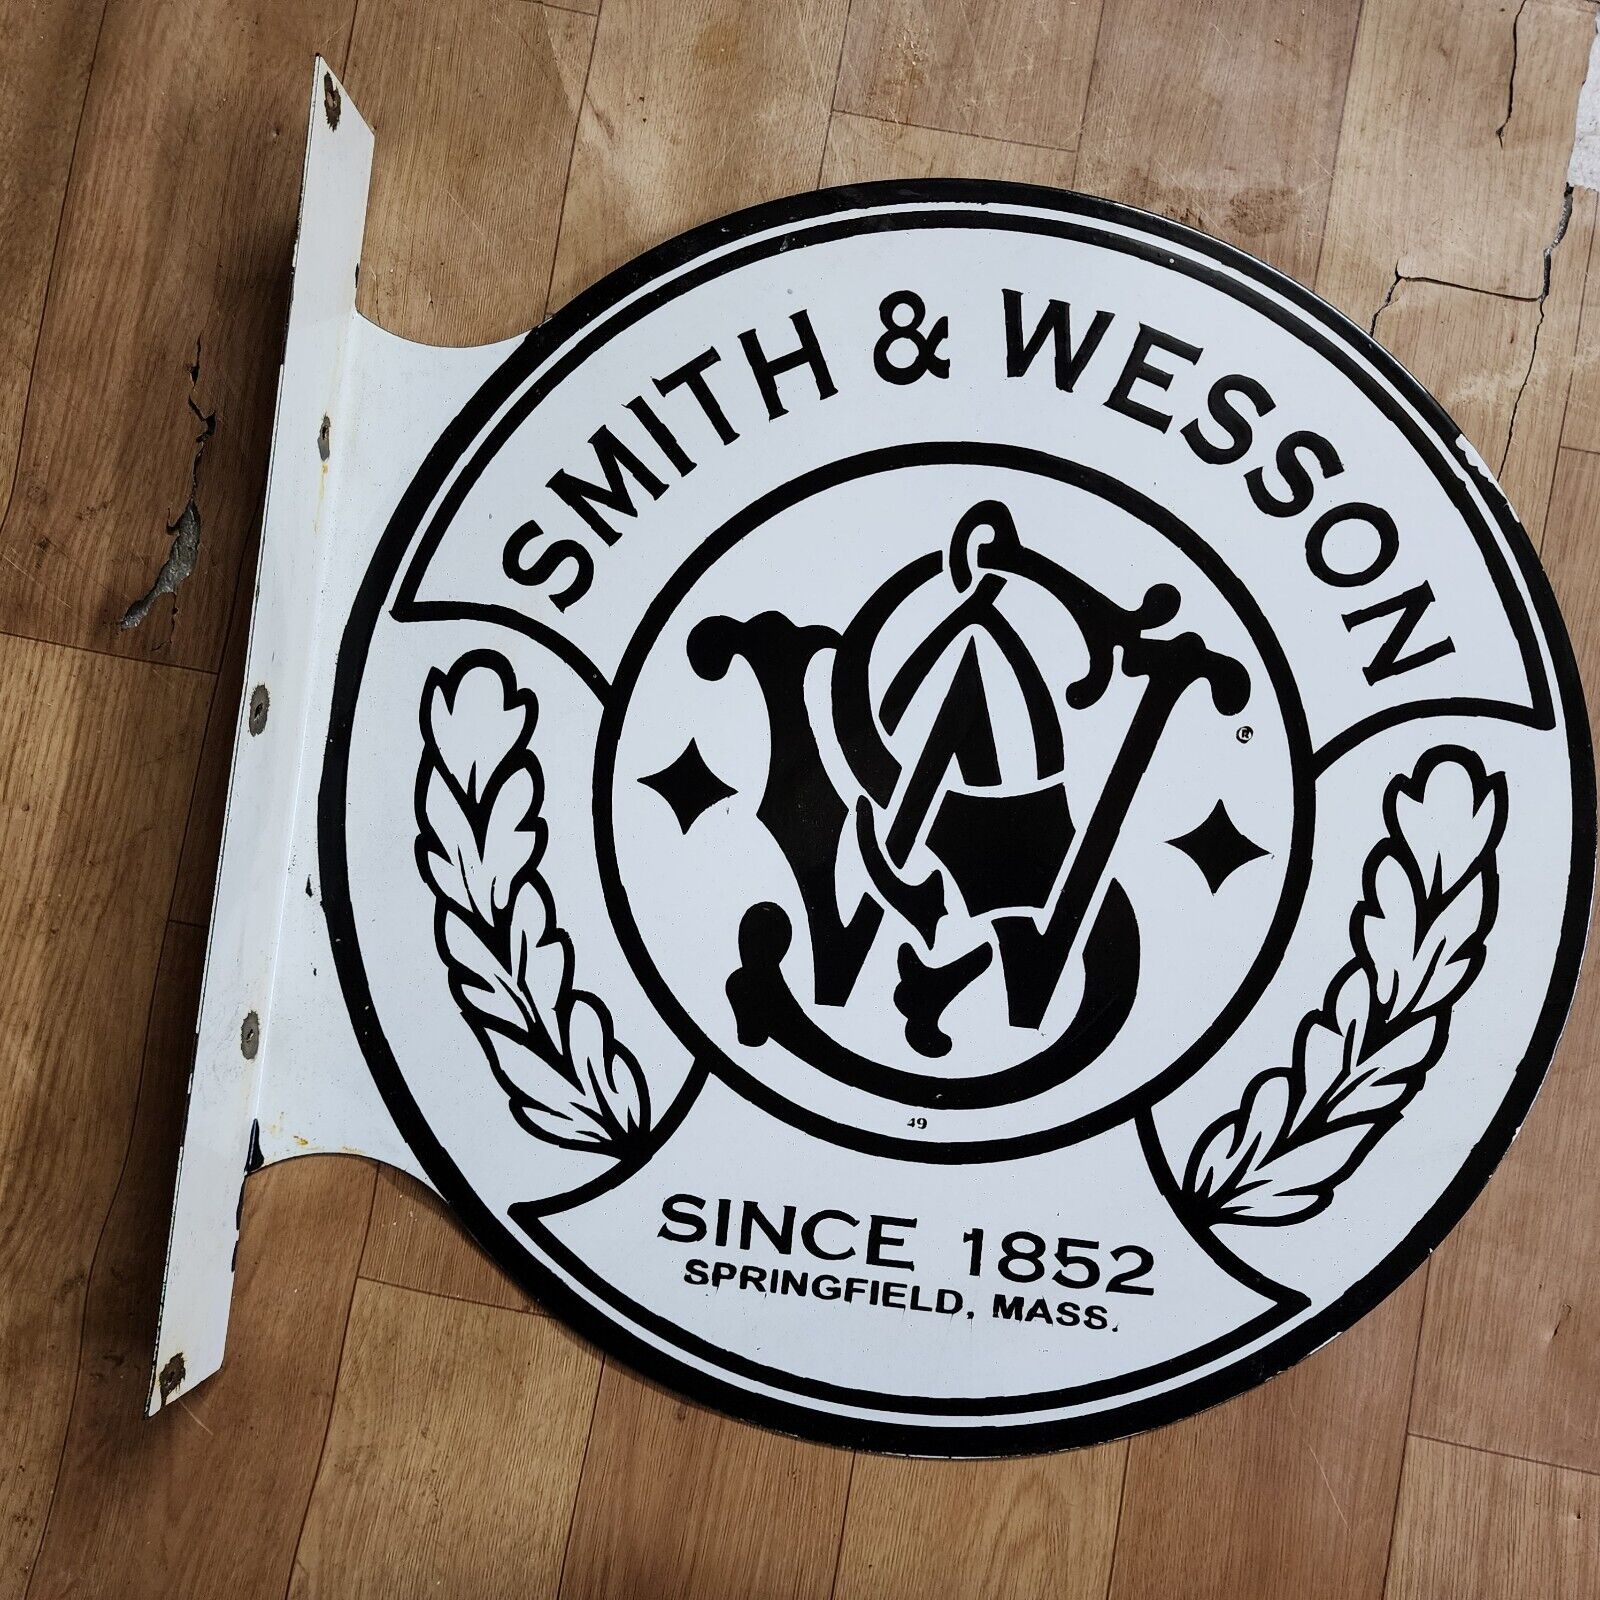 SMITH & WESSON FLANGE 2 SIDED PORCELAIN ENAMEL SIGN 17 1/2 X 17 INCHES